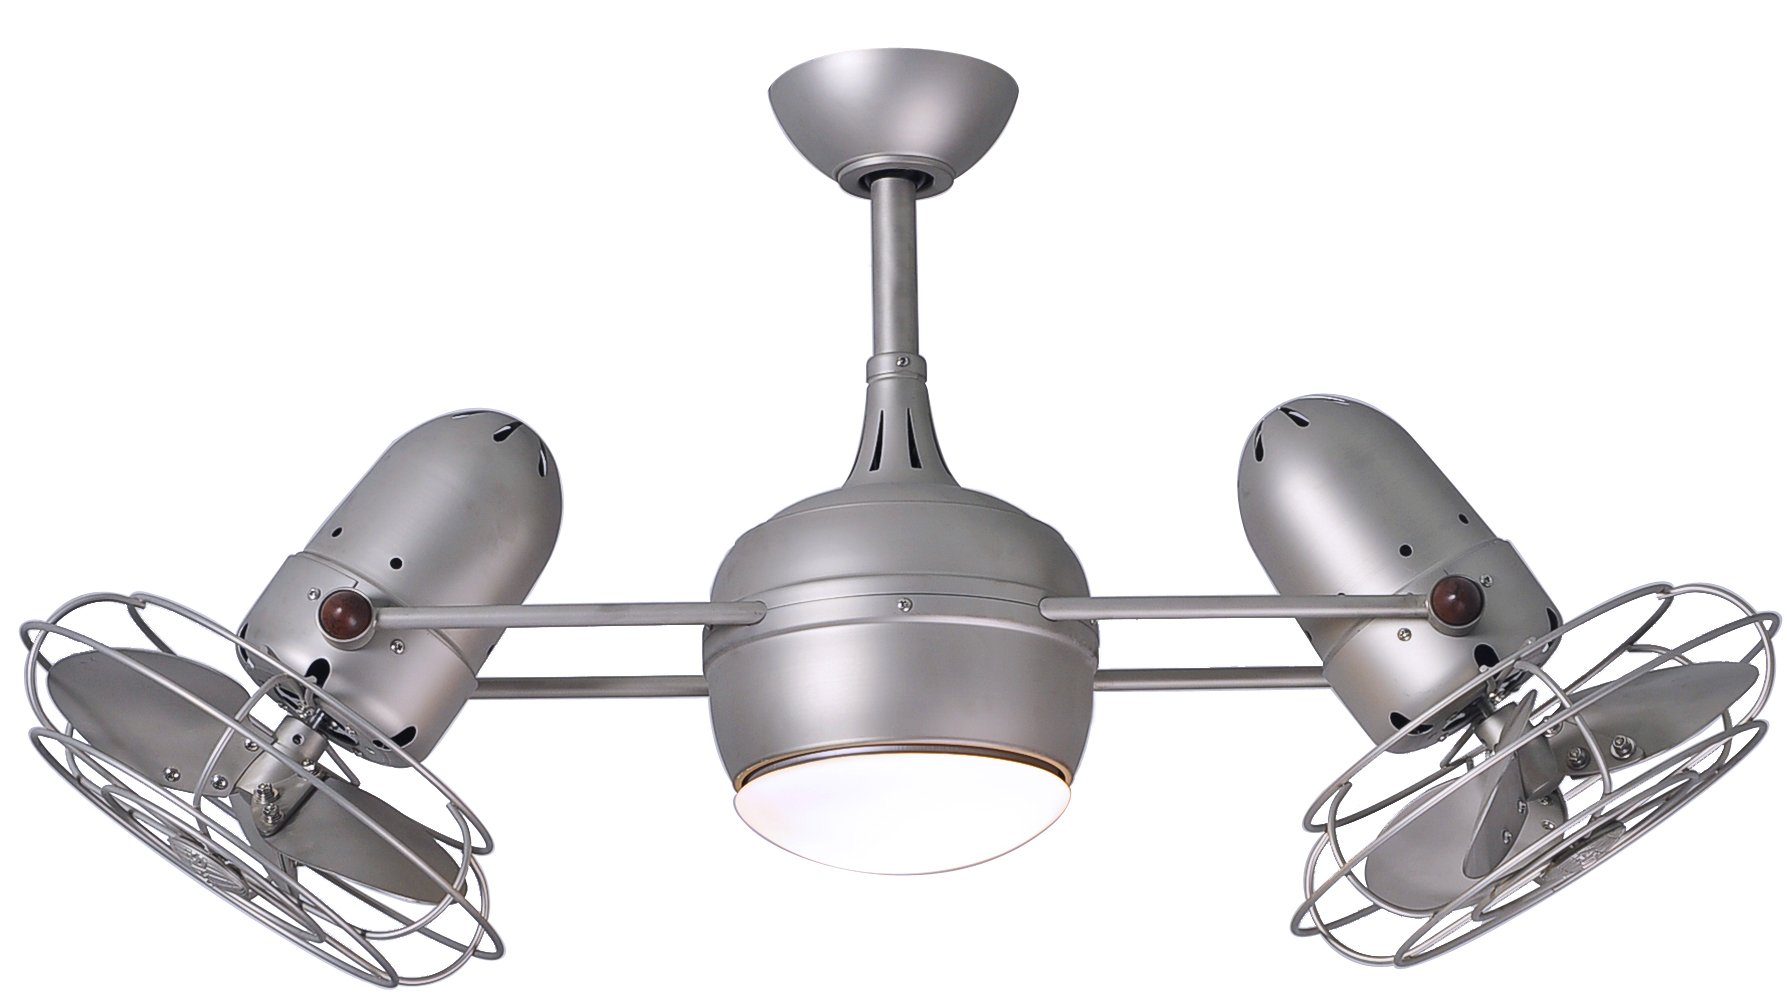 Dagny-LK rotational fan in Brushed Nickel with Metal blades made